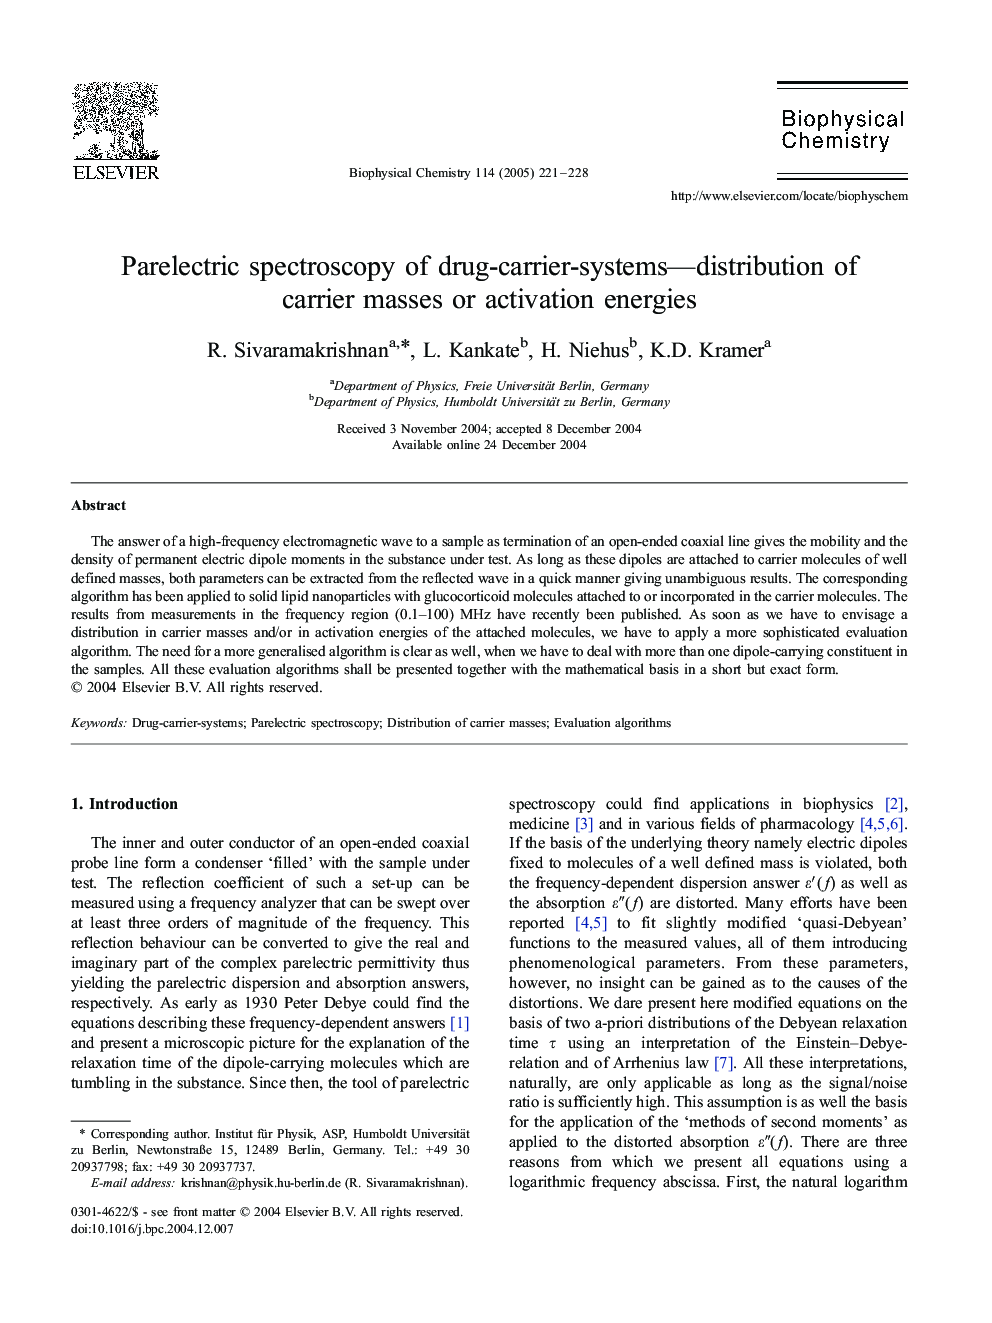 Parelectric spectroscopy of drug-carrier-systems-distribution of carrier masses or activation energies